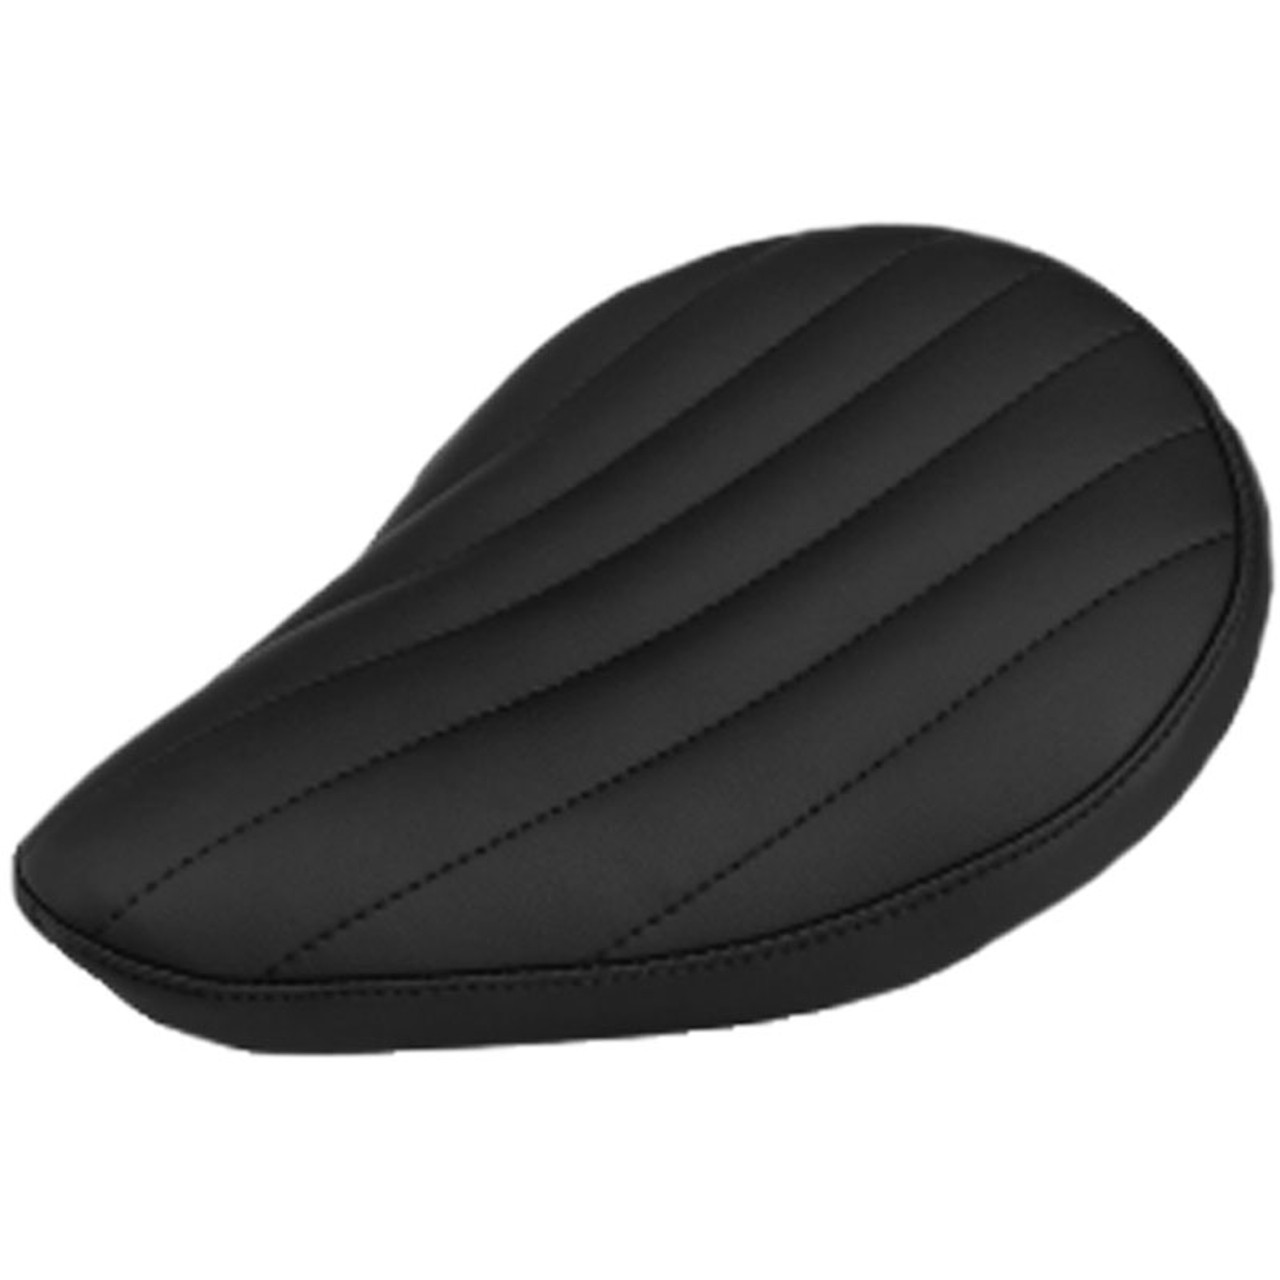 Sully's Customs Tuck & Roll Solo Seat - Get Lowered Cycles